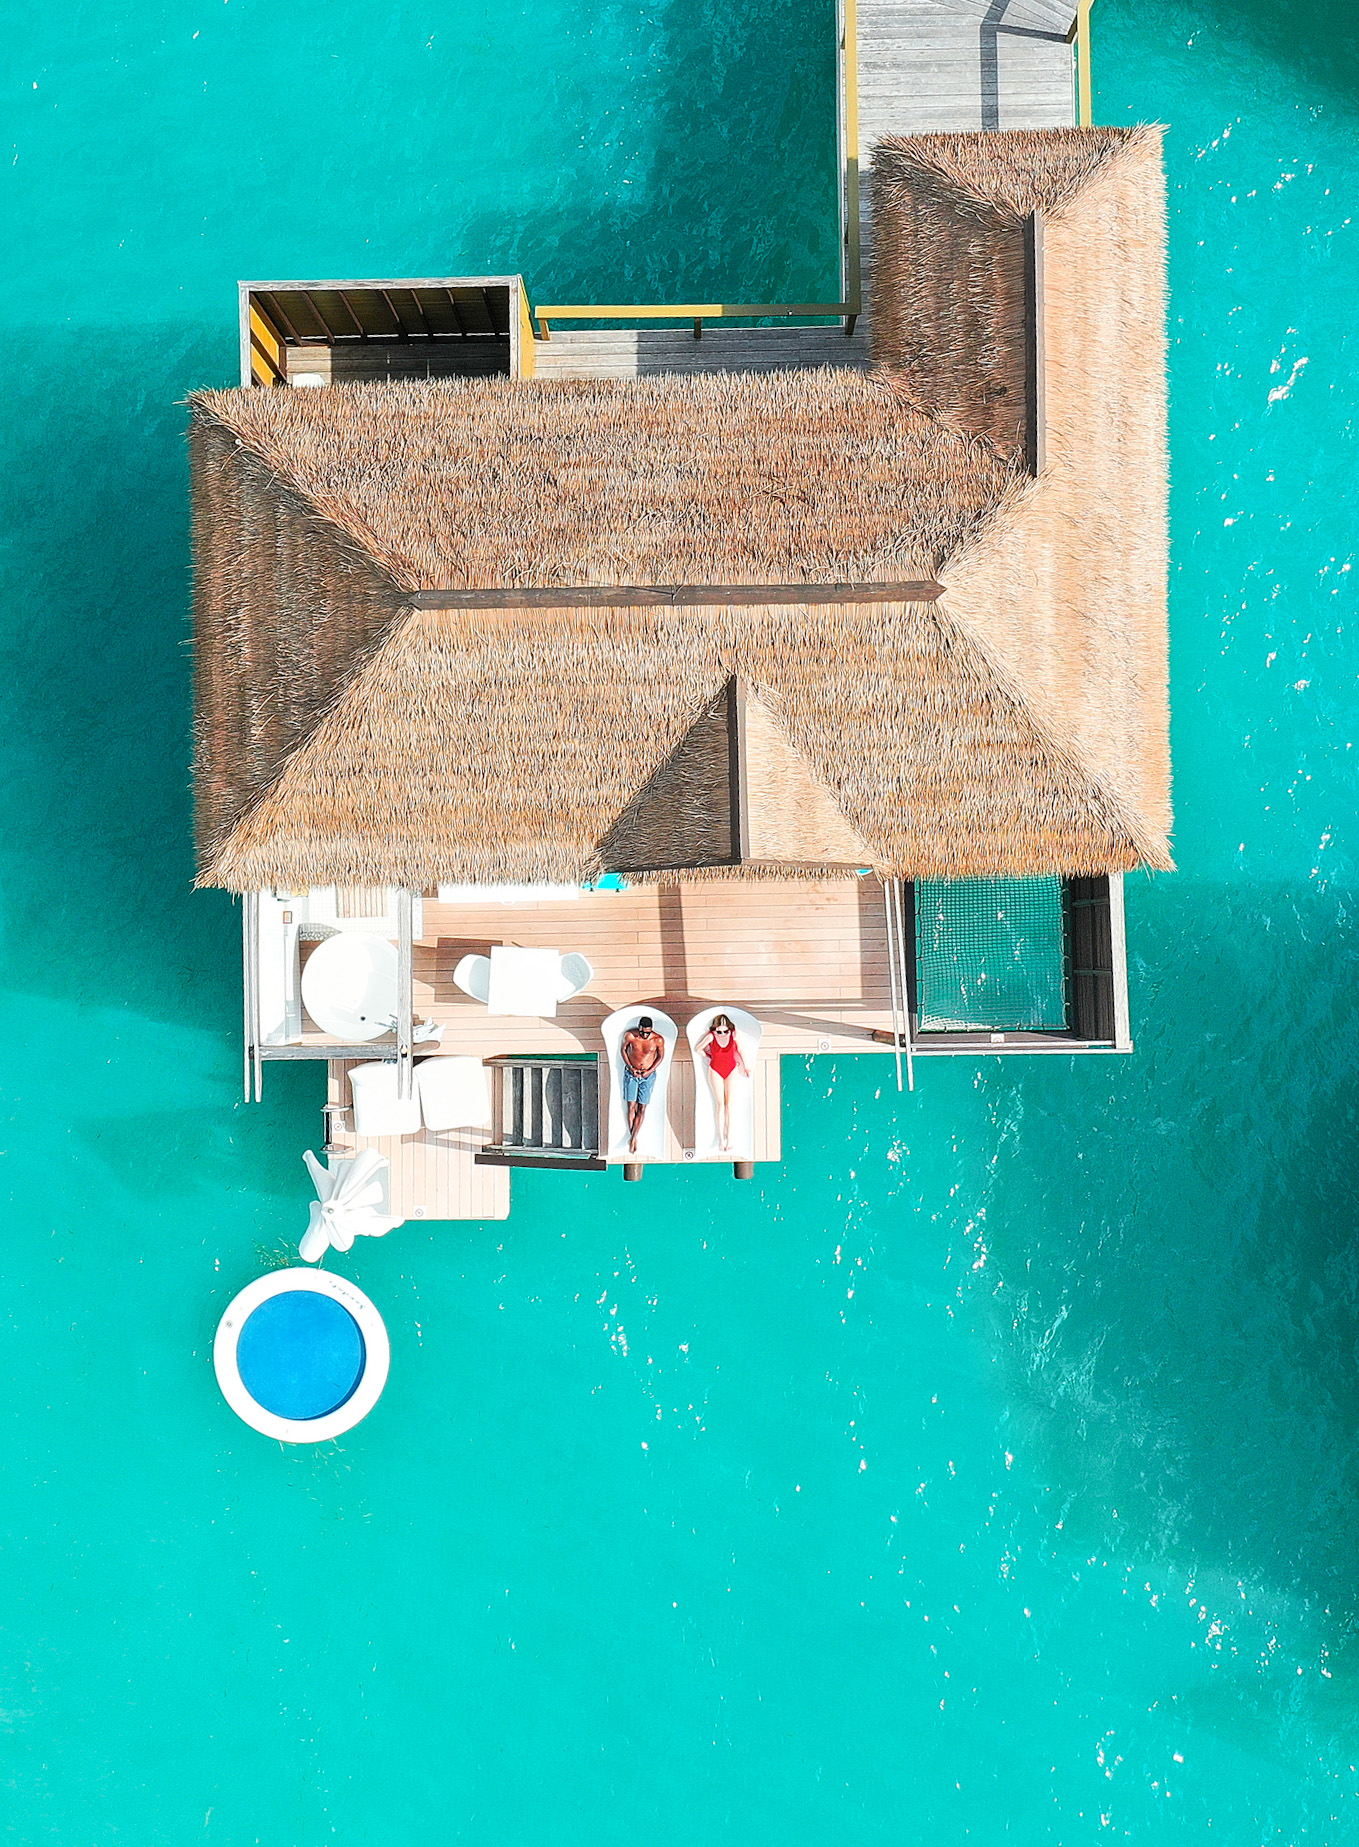 Woman and man laid on chairs on the deck of an overwater bungalow surrounded by blue water. The article is about overwater bungalows near Florida. 